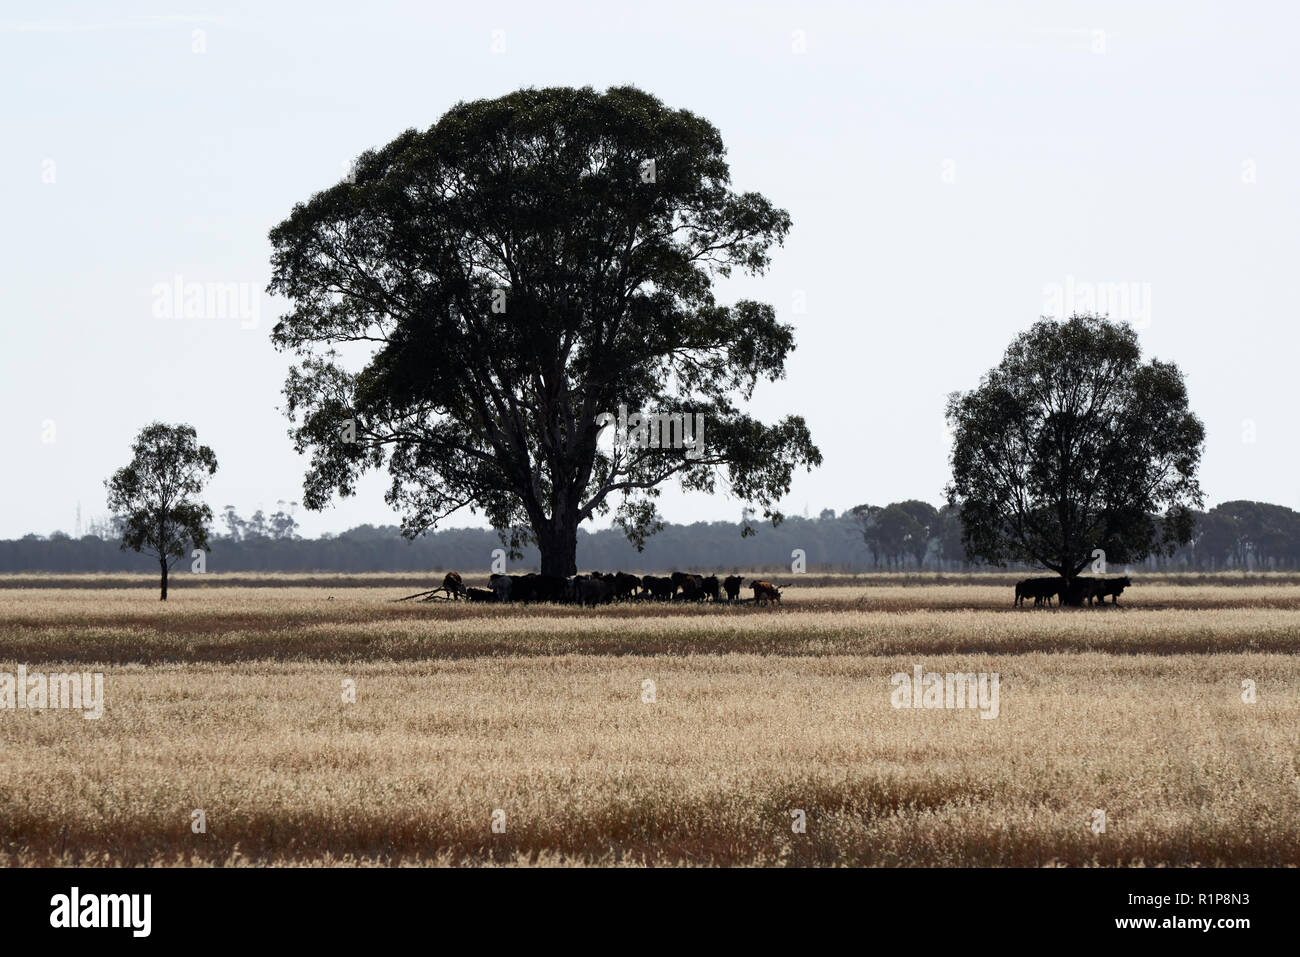 Cattle taking cover under eucalyptus trees in the hot midday heat haze of the Australian landscape. Stock Photo